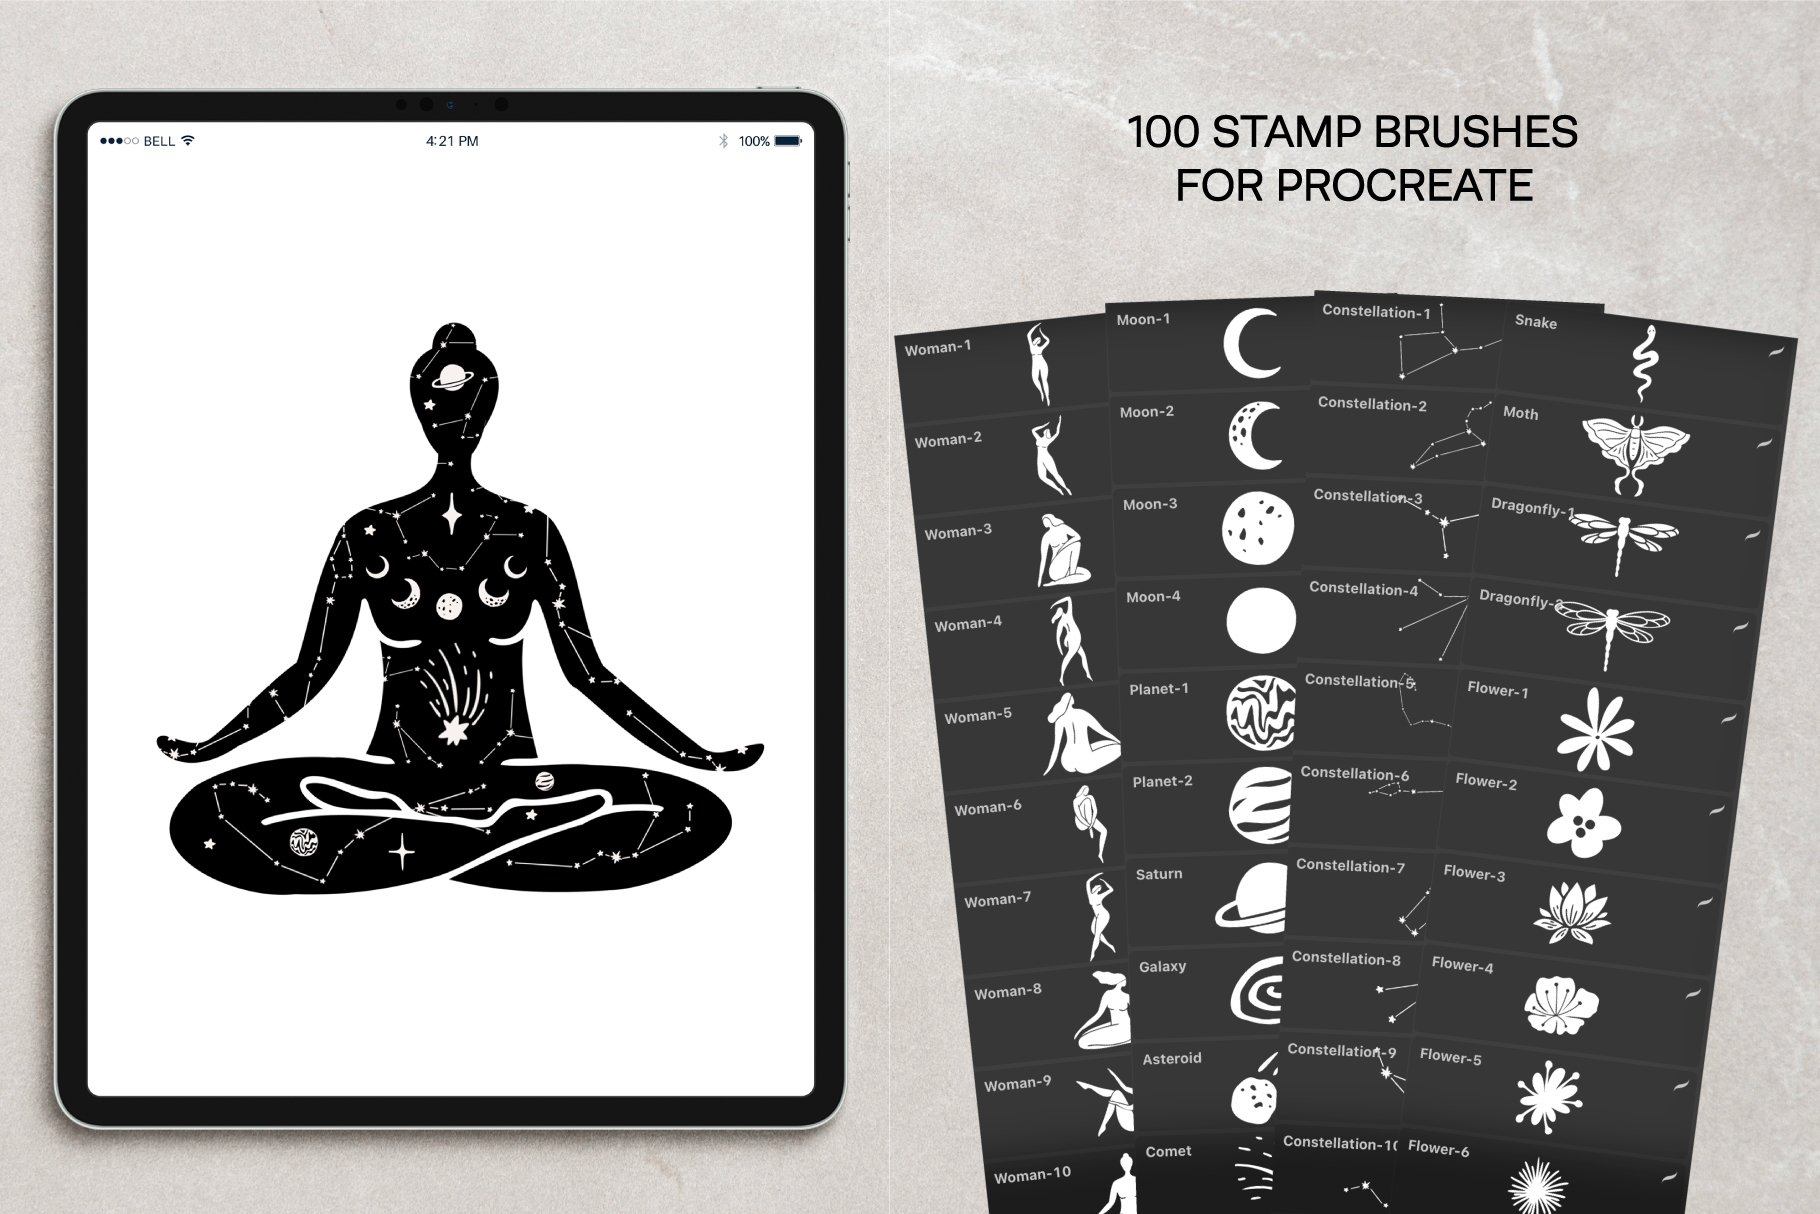 celestial woman stamp brushes 5 284